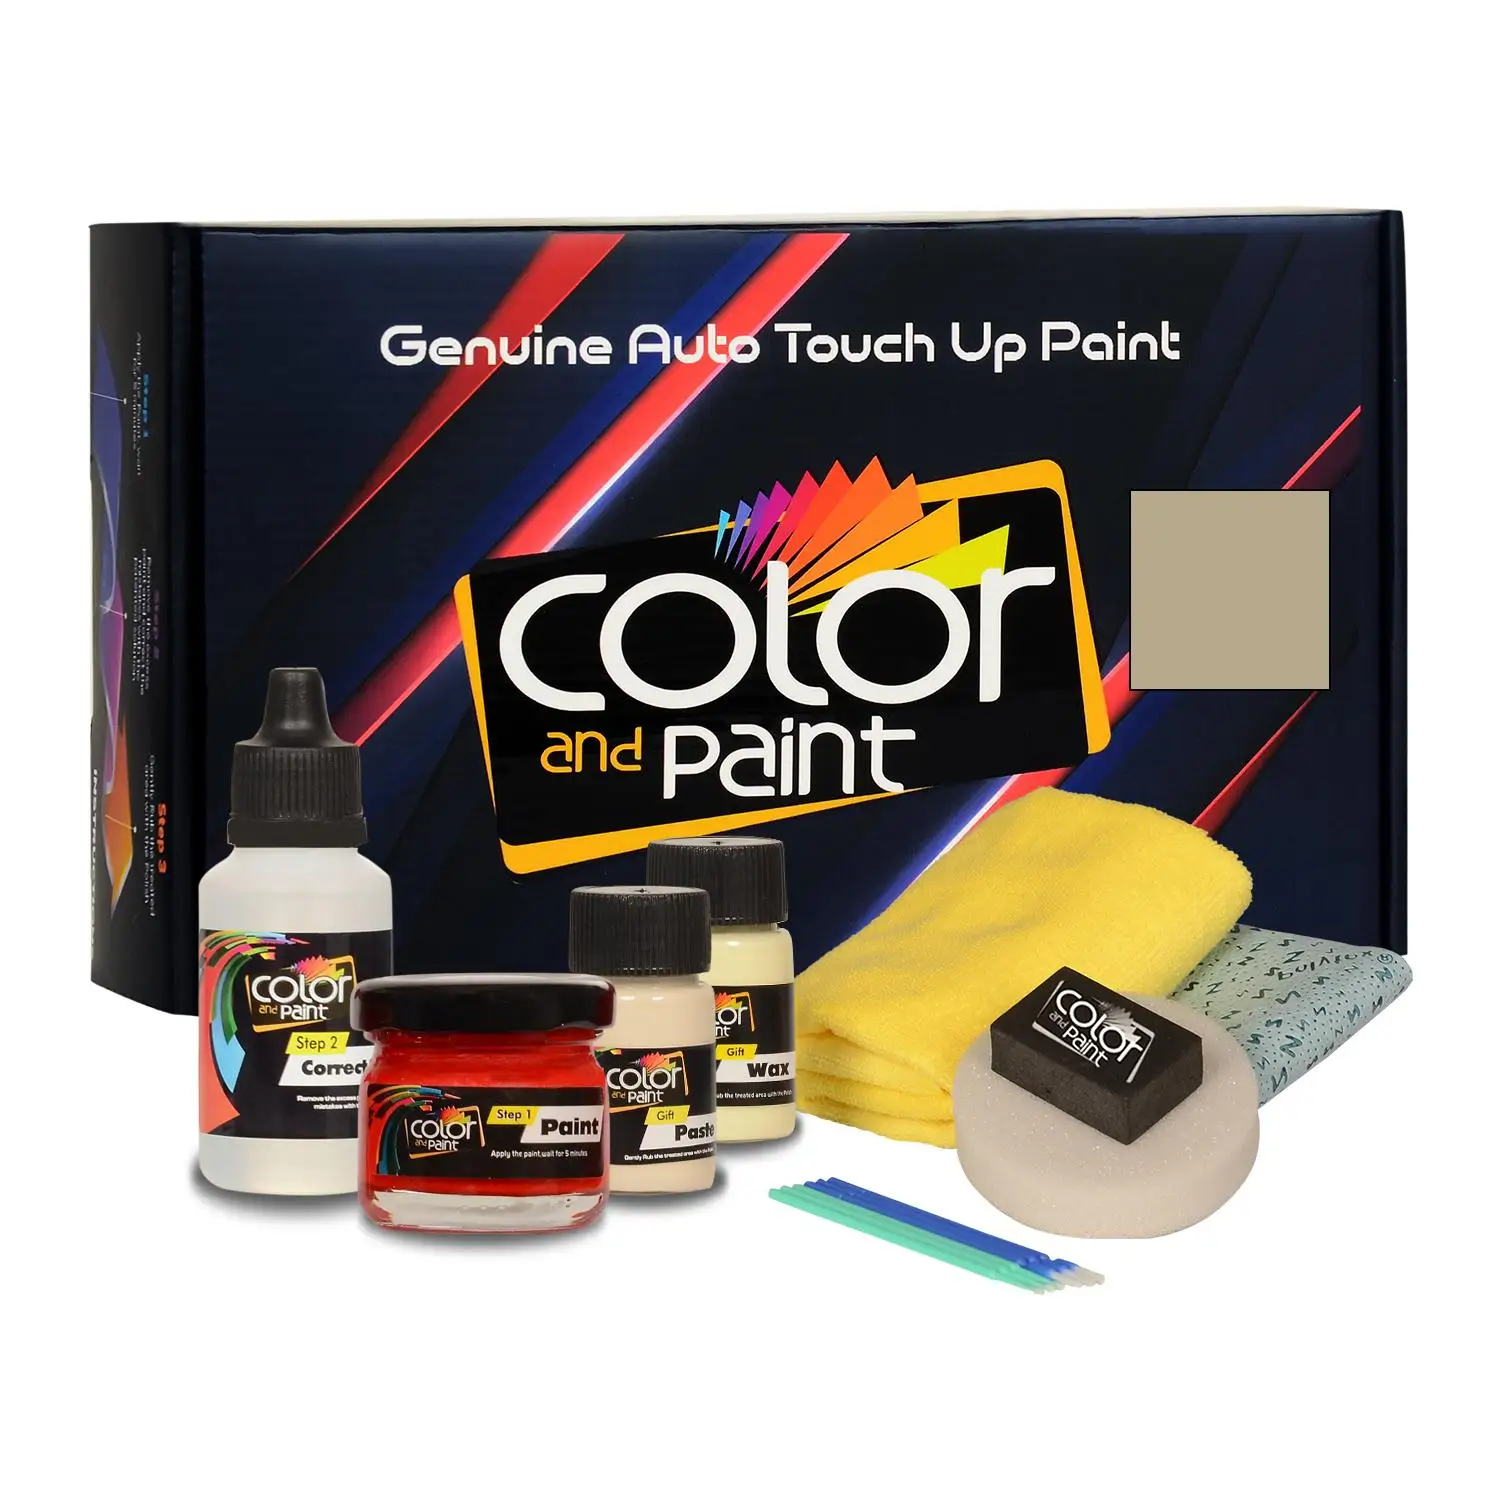 

Color and Paint compatible with Daewoo Automotive Touch Up Paint - BRIGHTON GOLD MET - 60U - Basic Care